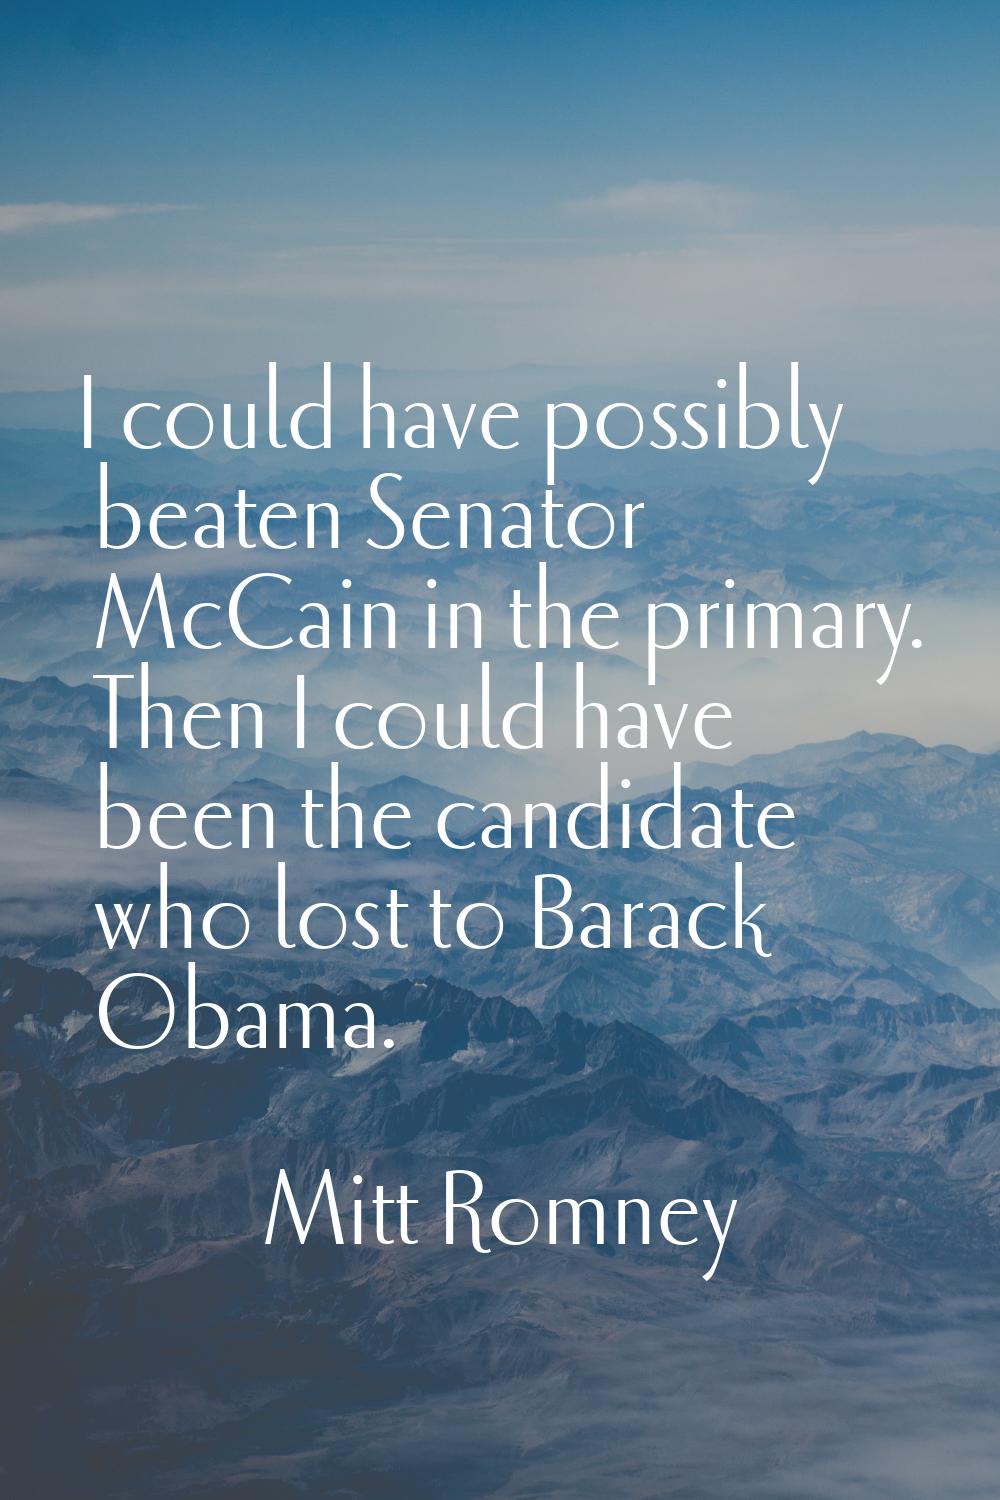 I could have possibly beaten Senator McCain in the primary. Then I could have been the candidate wh